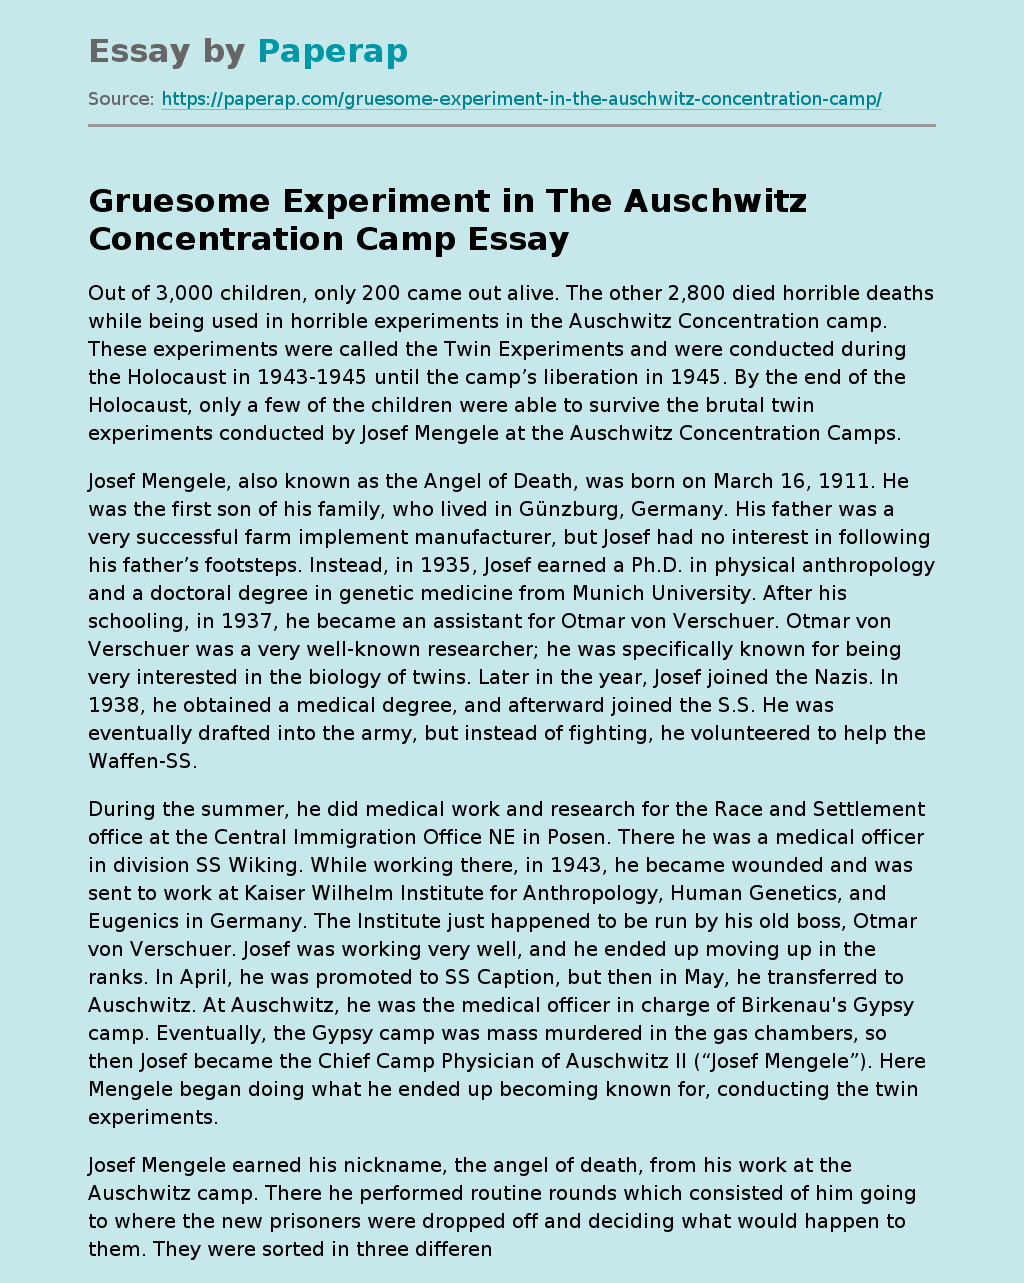 Gruesome Experiment in The Auschwitz Concentration Camp